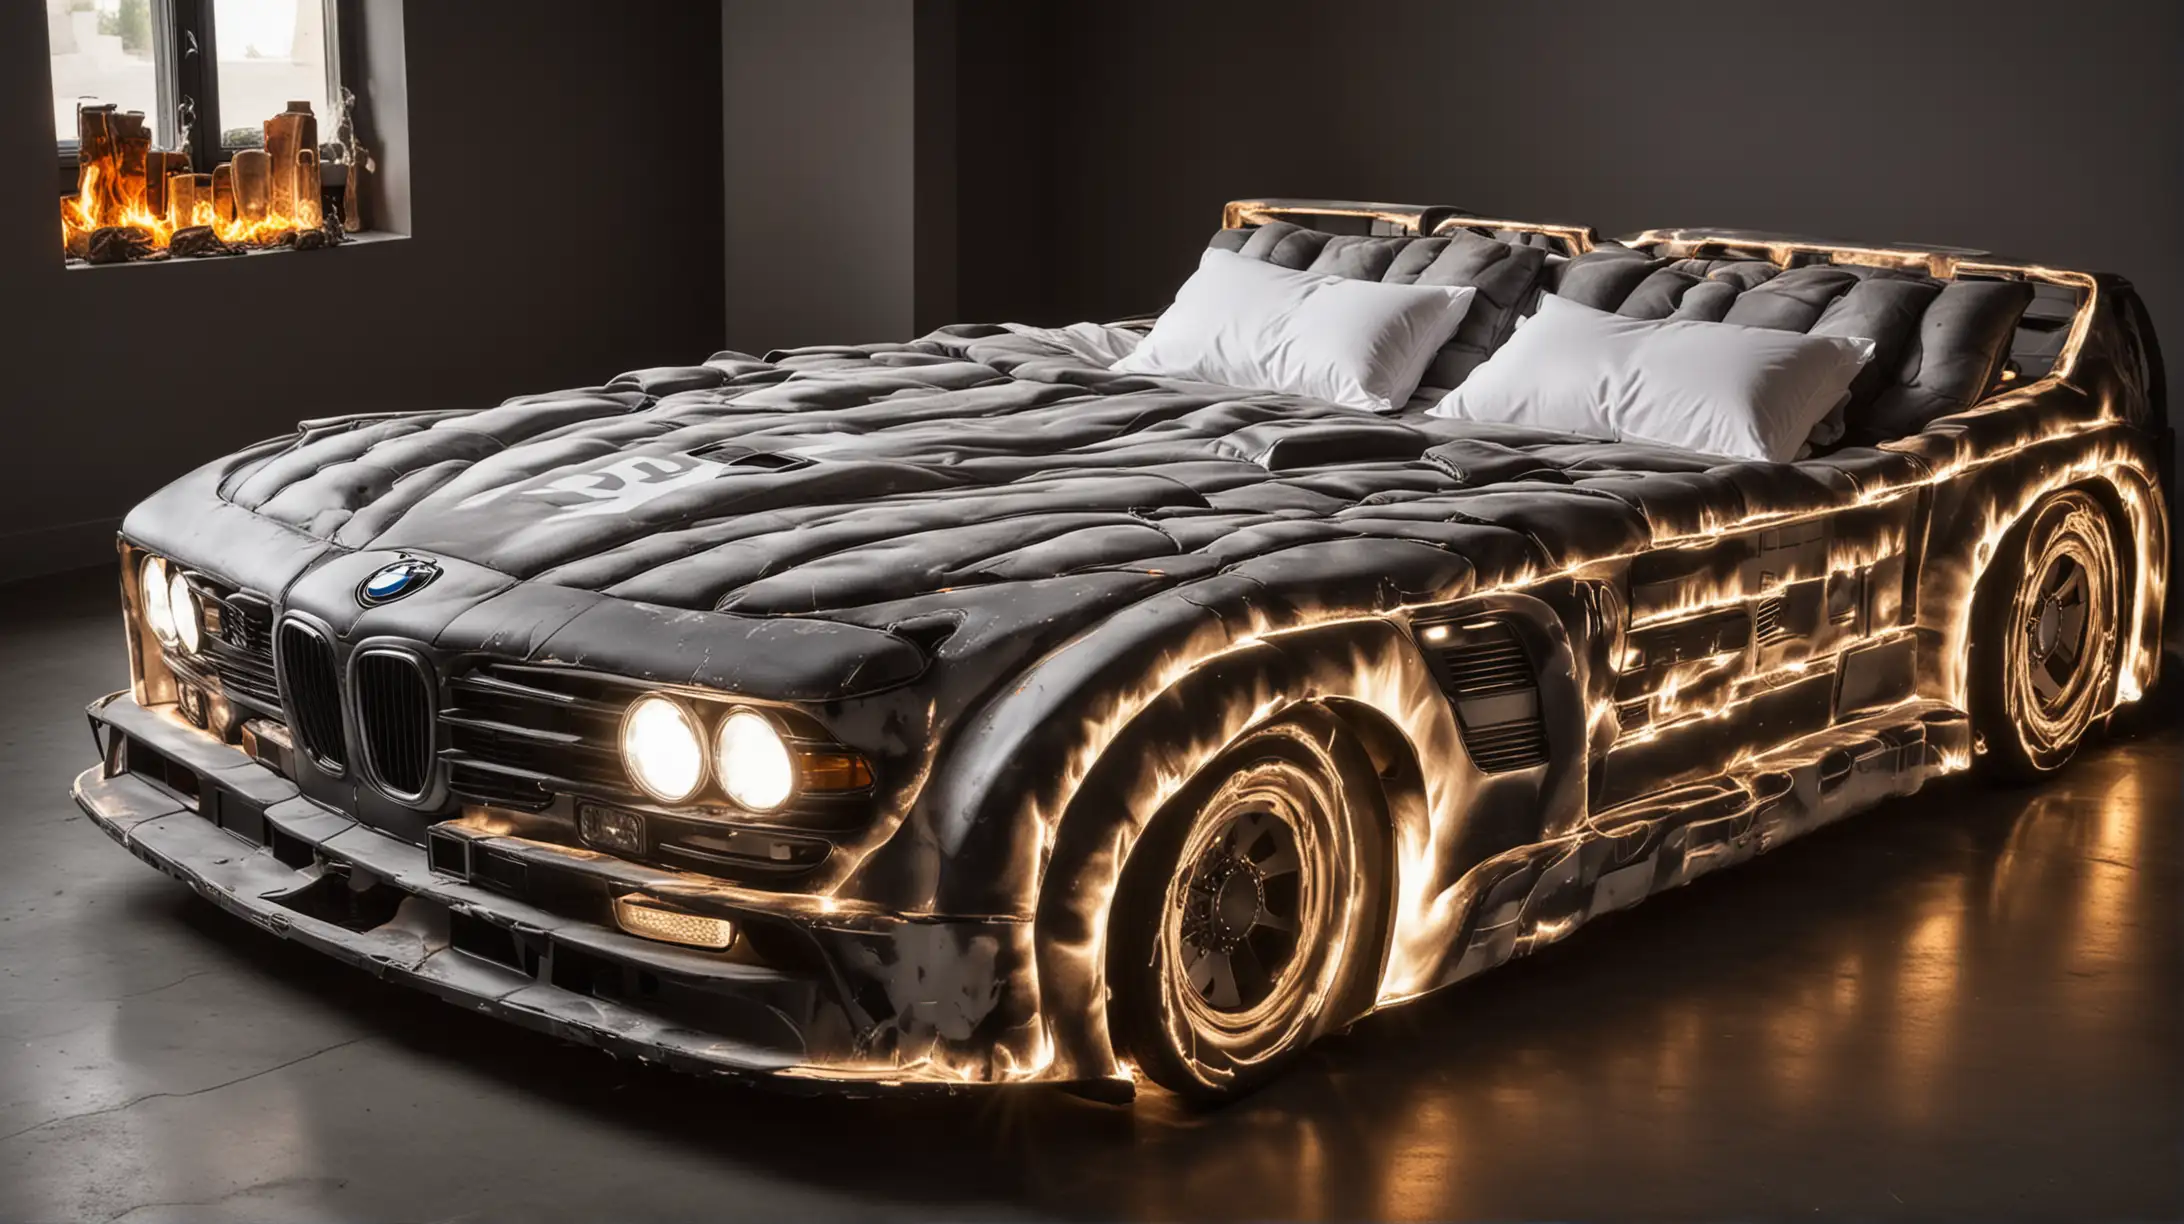 Luxury Double Bed Shaped as BMW Car with Illuminated Headlights and Fiery Graphics